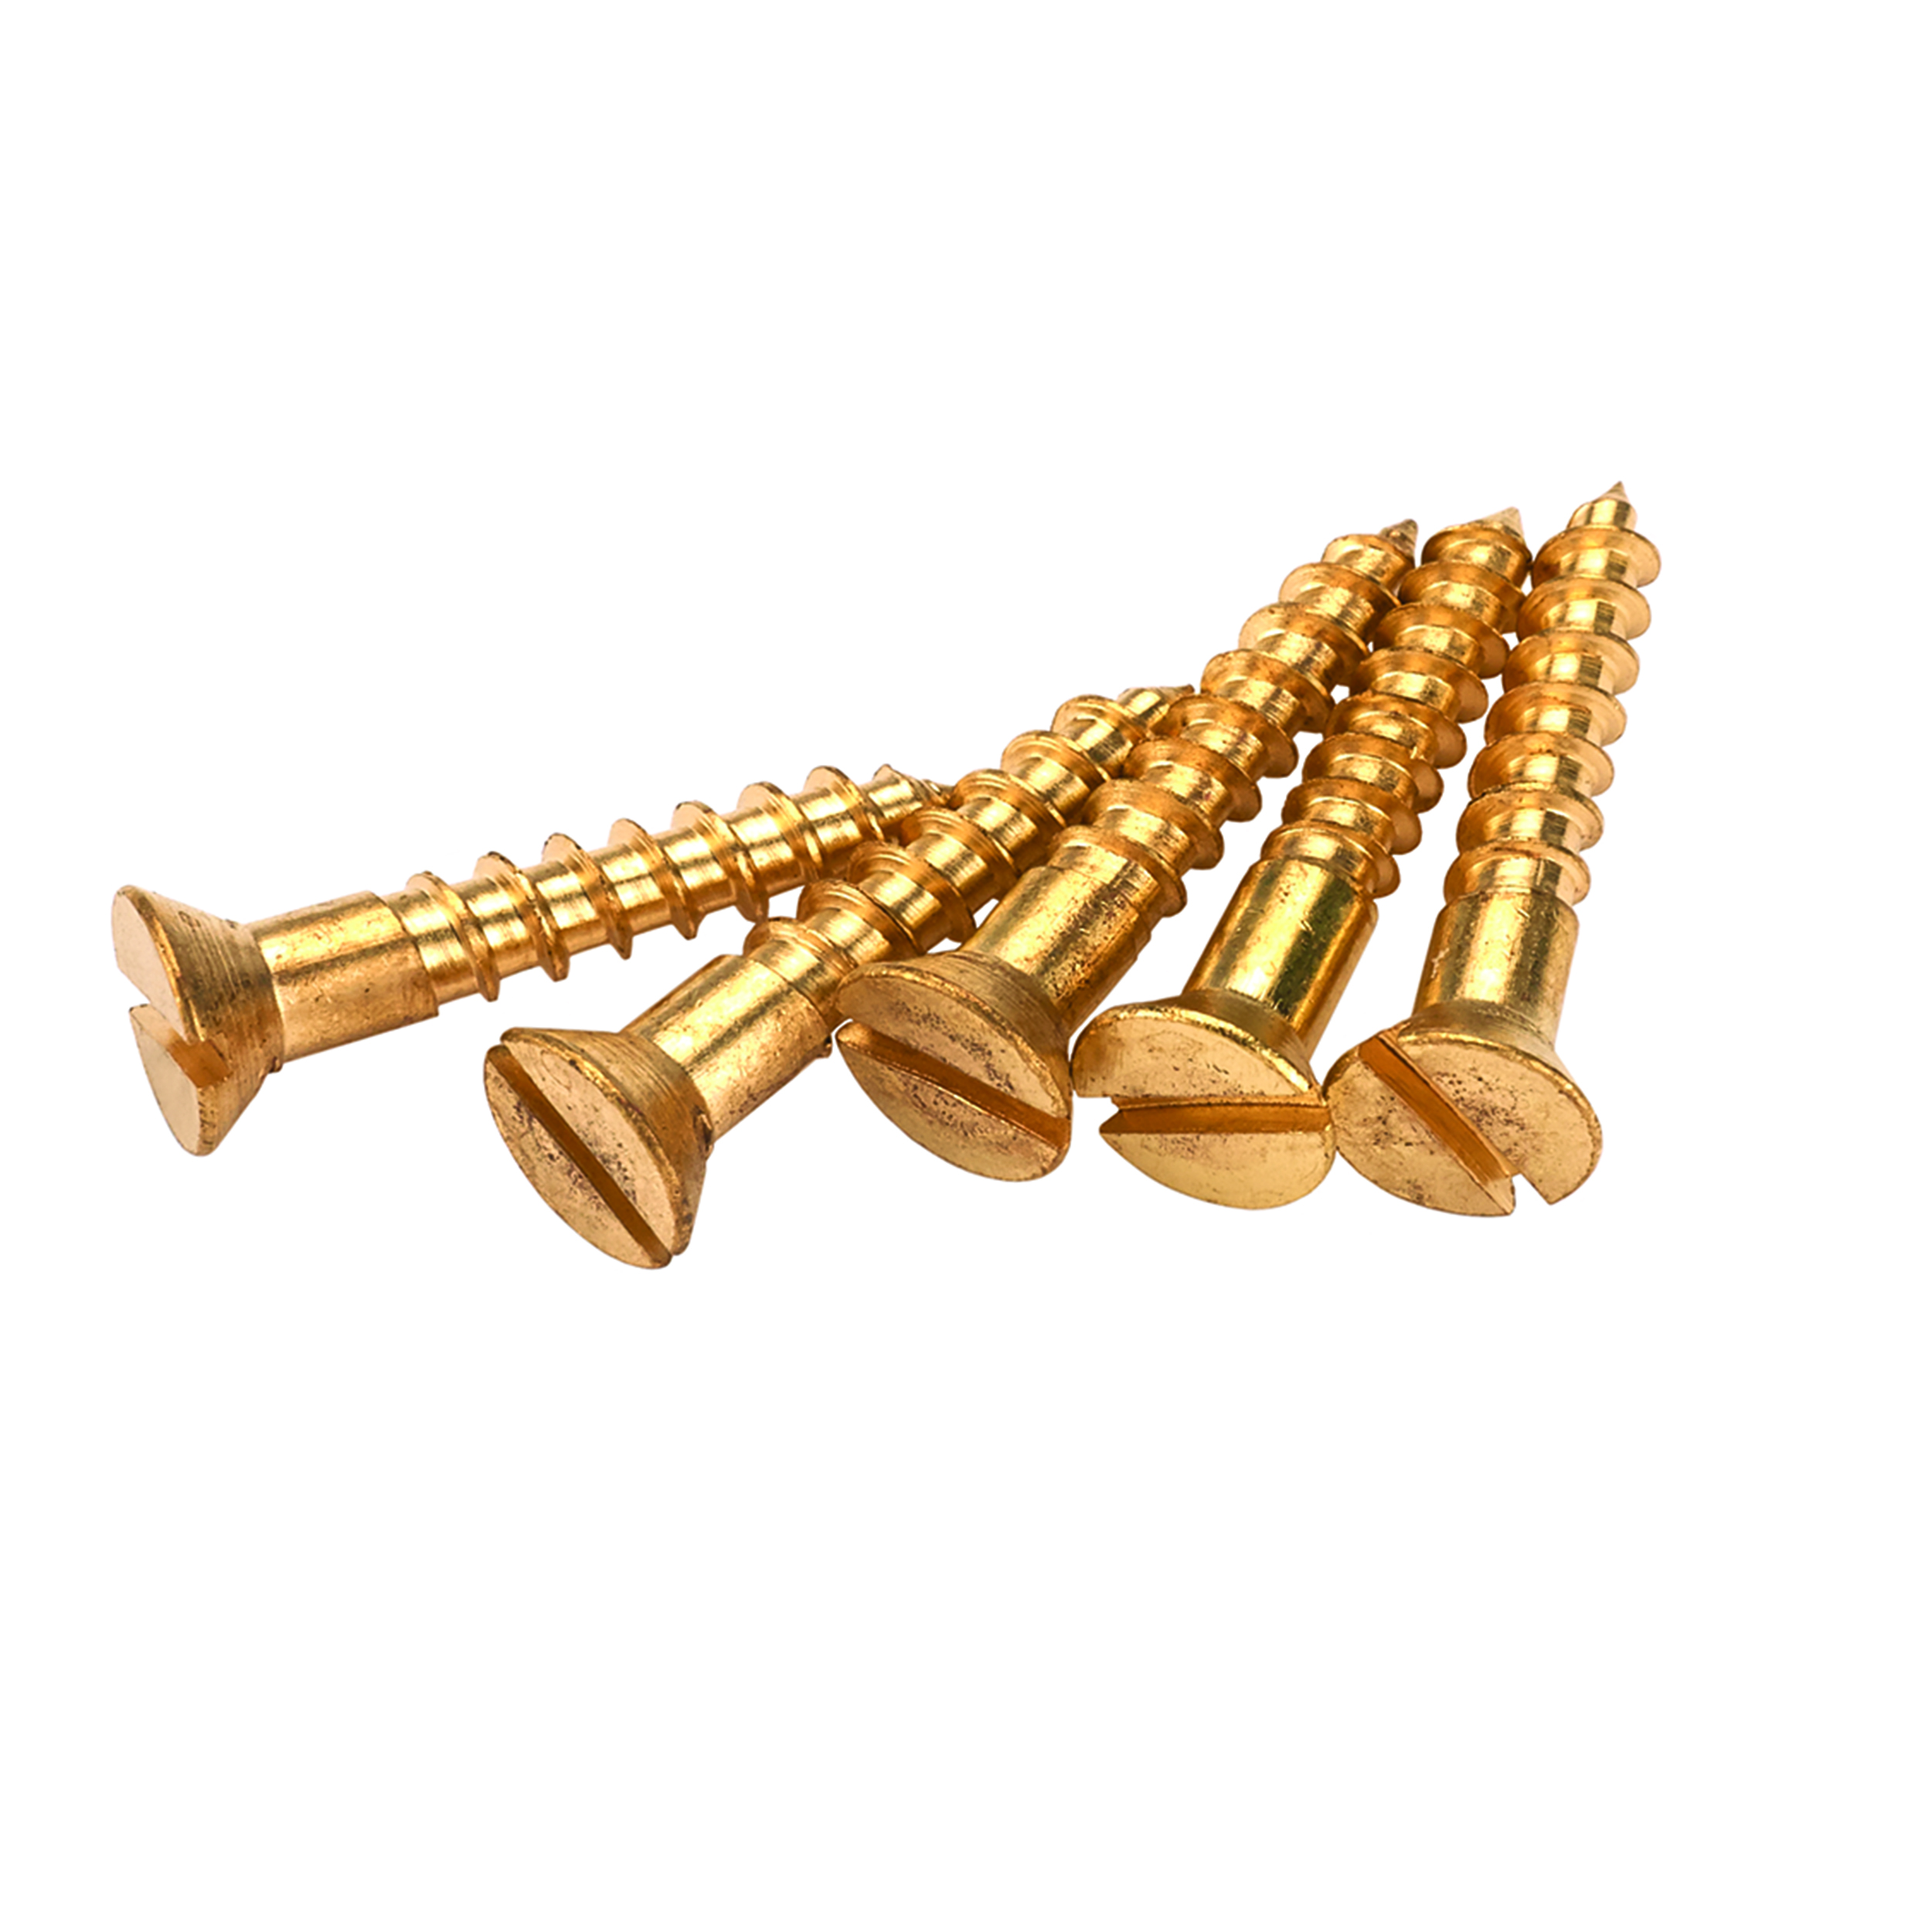 Solid Brass Screws #6 X 3/4" Slotted 25-piece